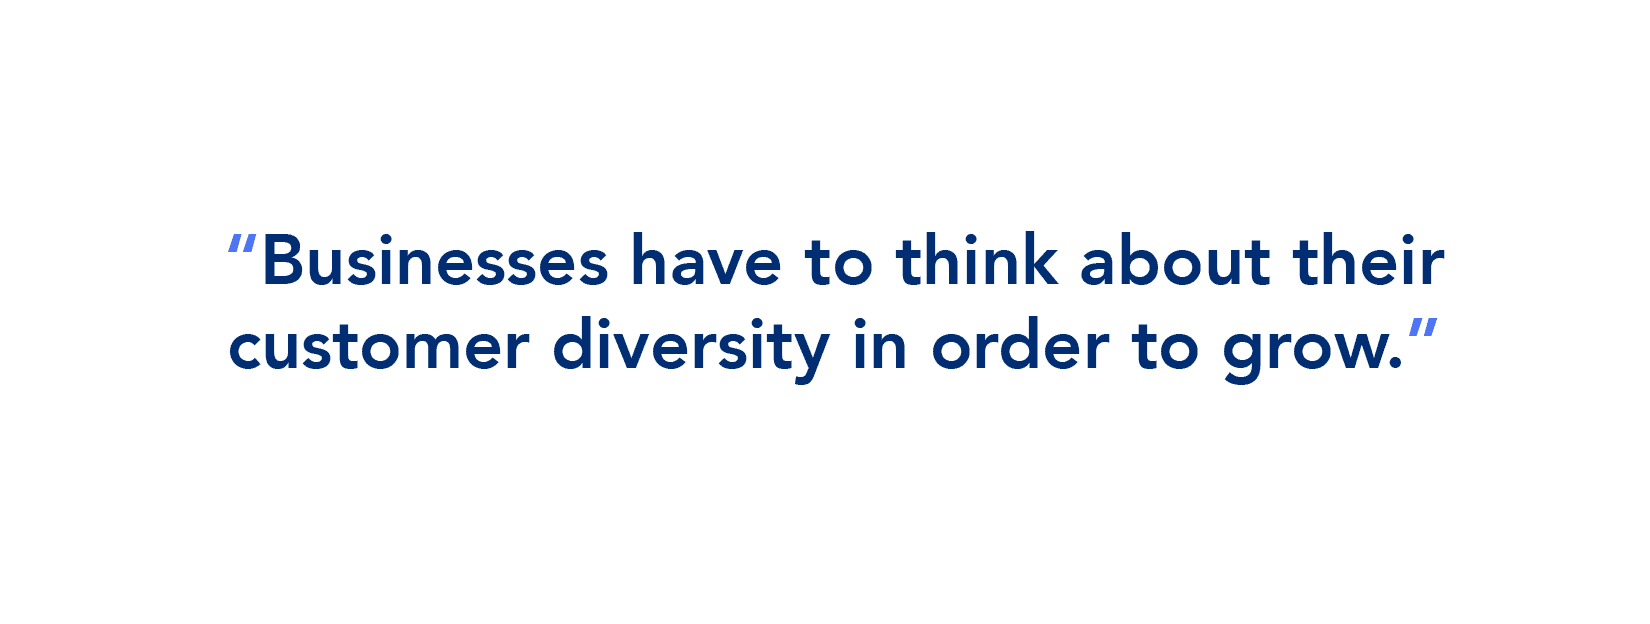 Businesses have to think about their customer diversity in order to grow